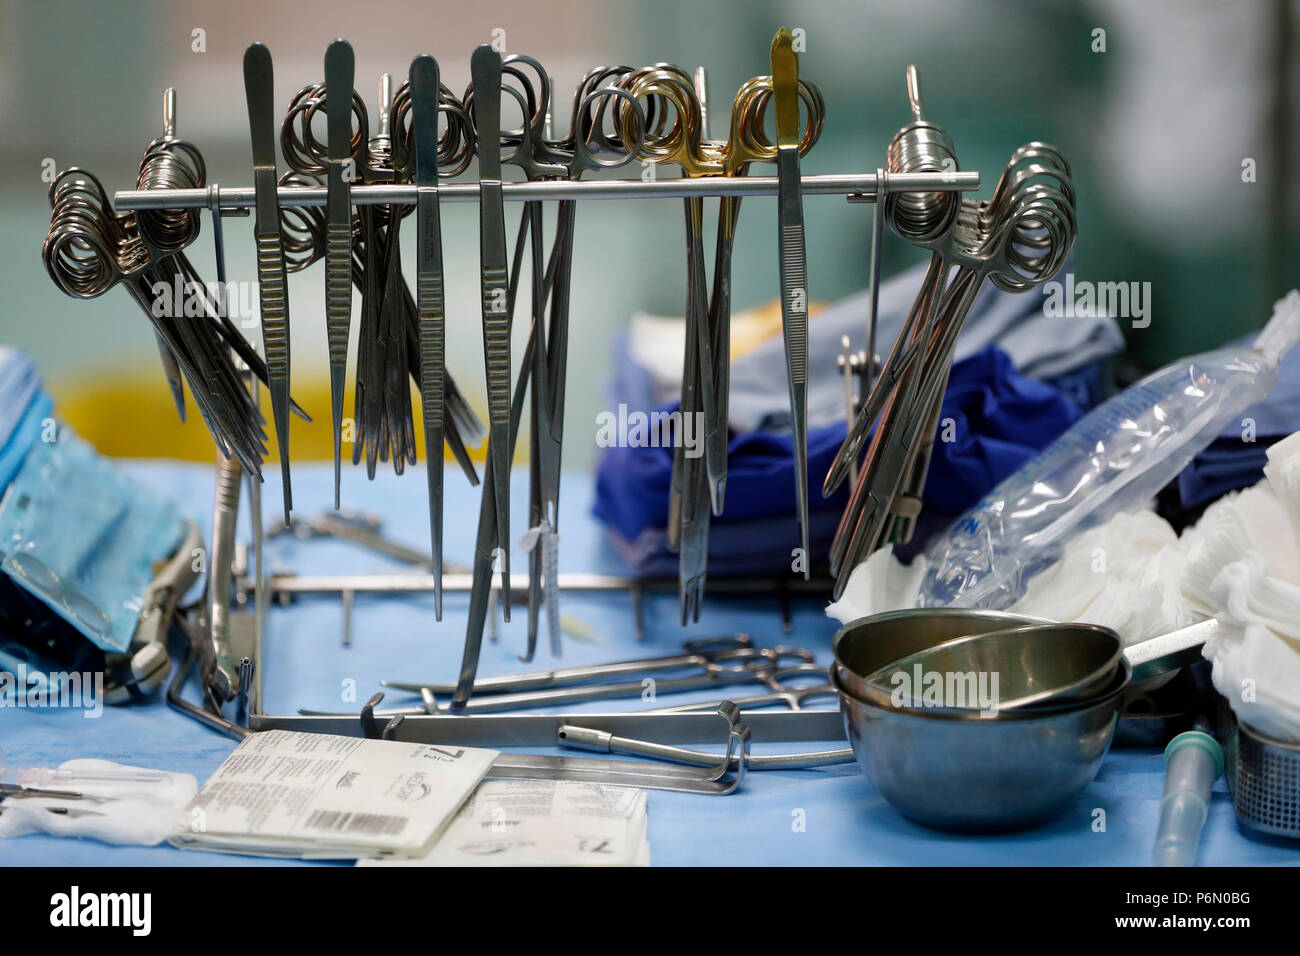 Tam Duc Cardiology Hospital. Operating theater. Cardiac surgery.  Surgical instruments. Ho Chi Minh City. Vietnam. Stock Photo